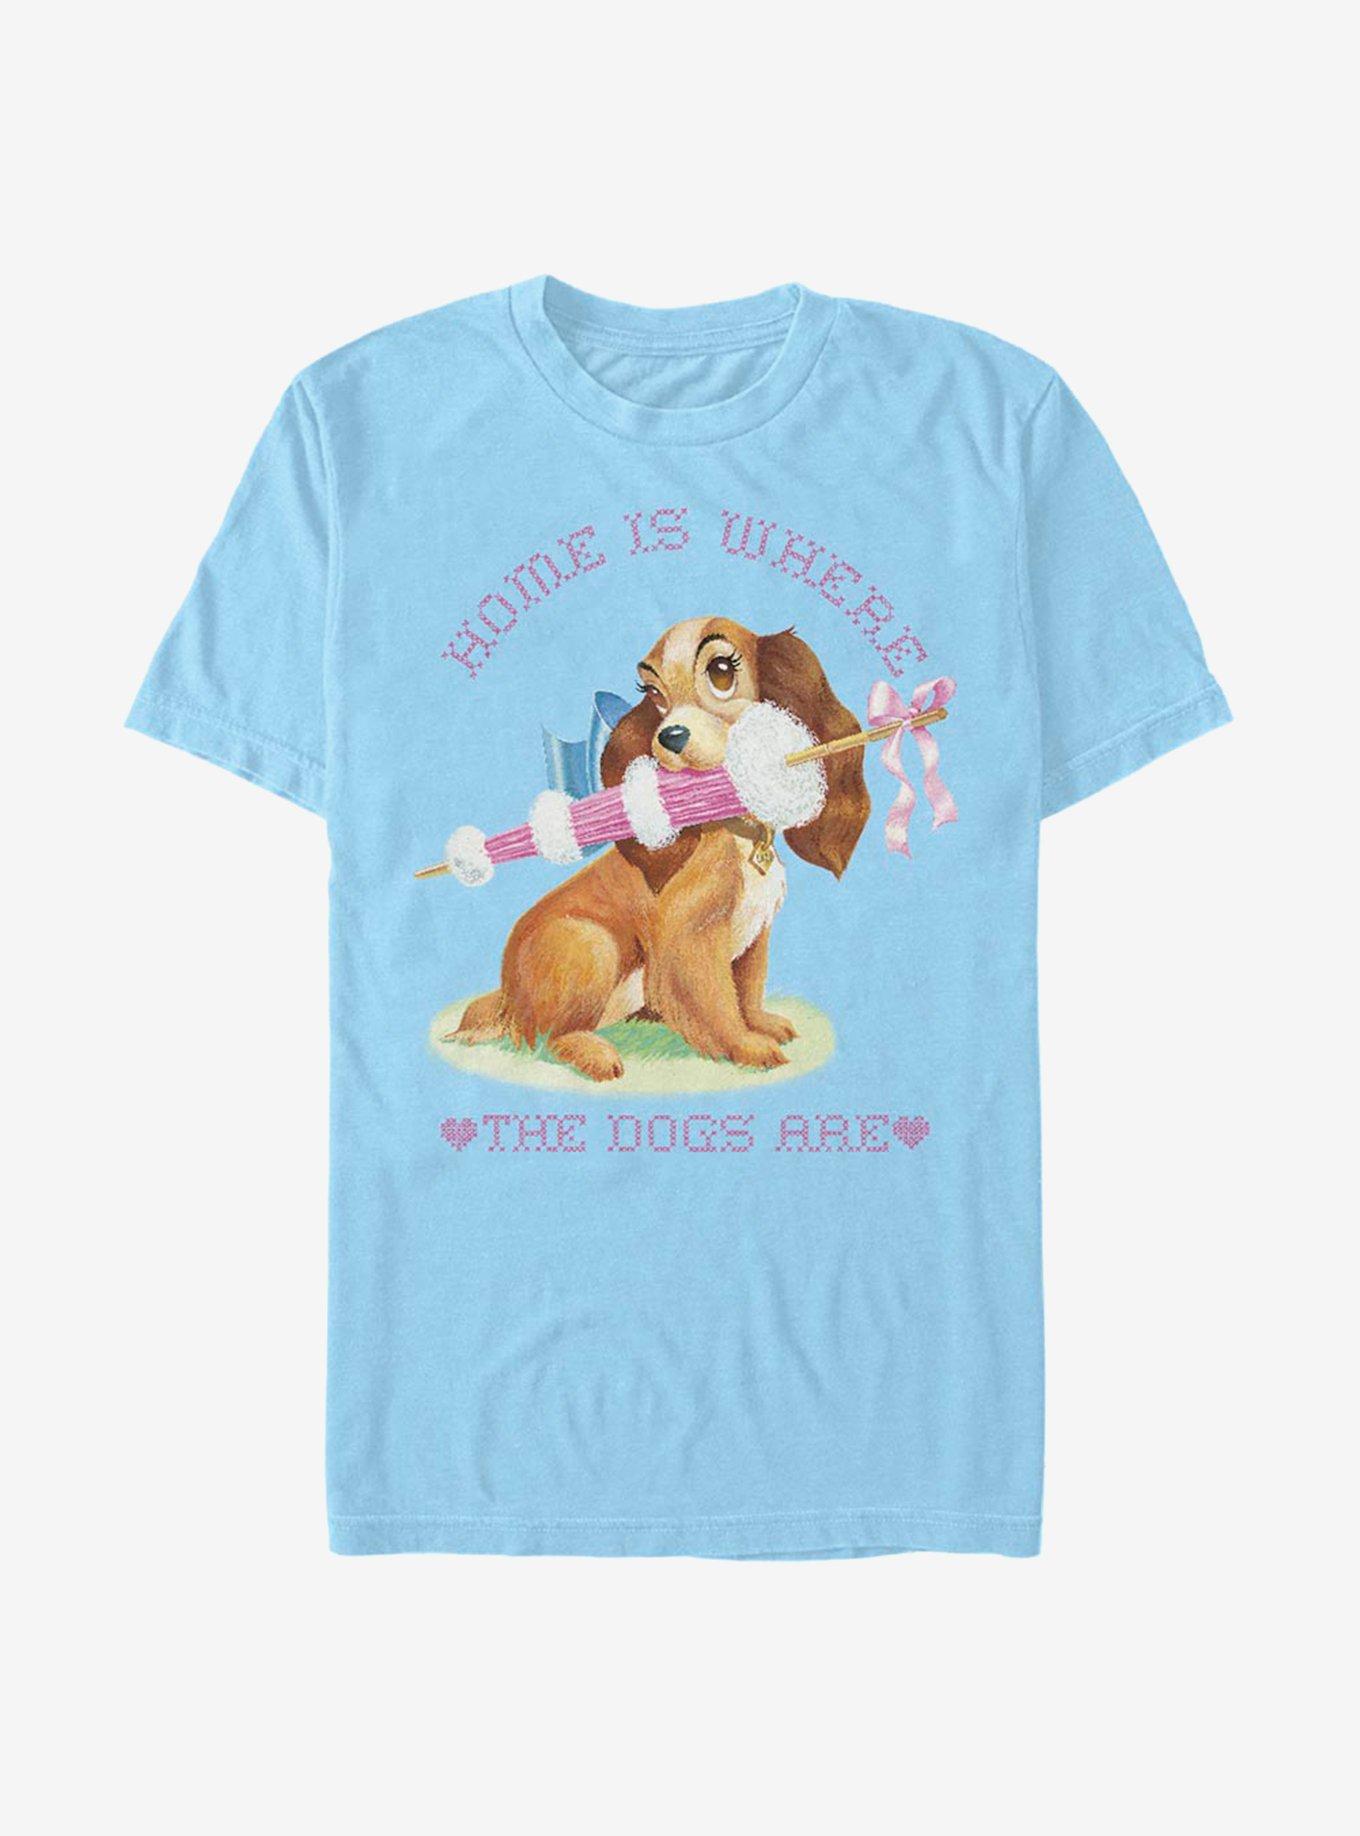 Disney Lady And The Tramp Home Is Where T-Shirt, LT BLUE, hi-res